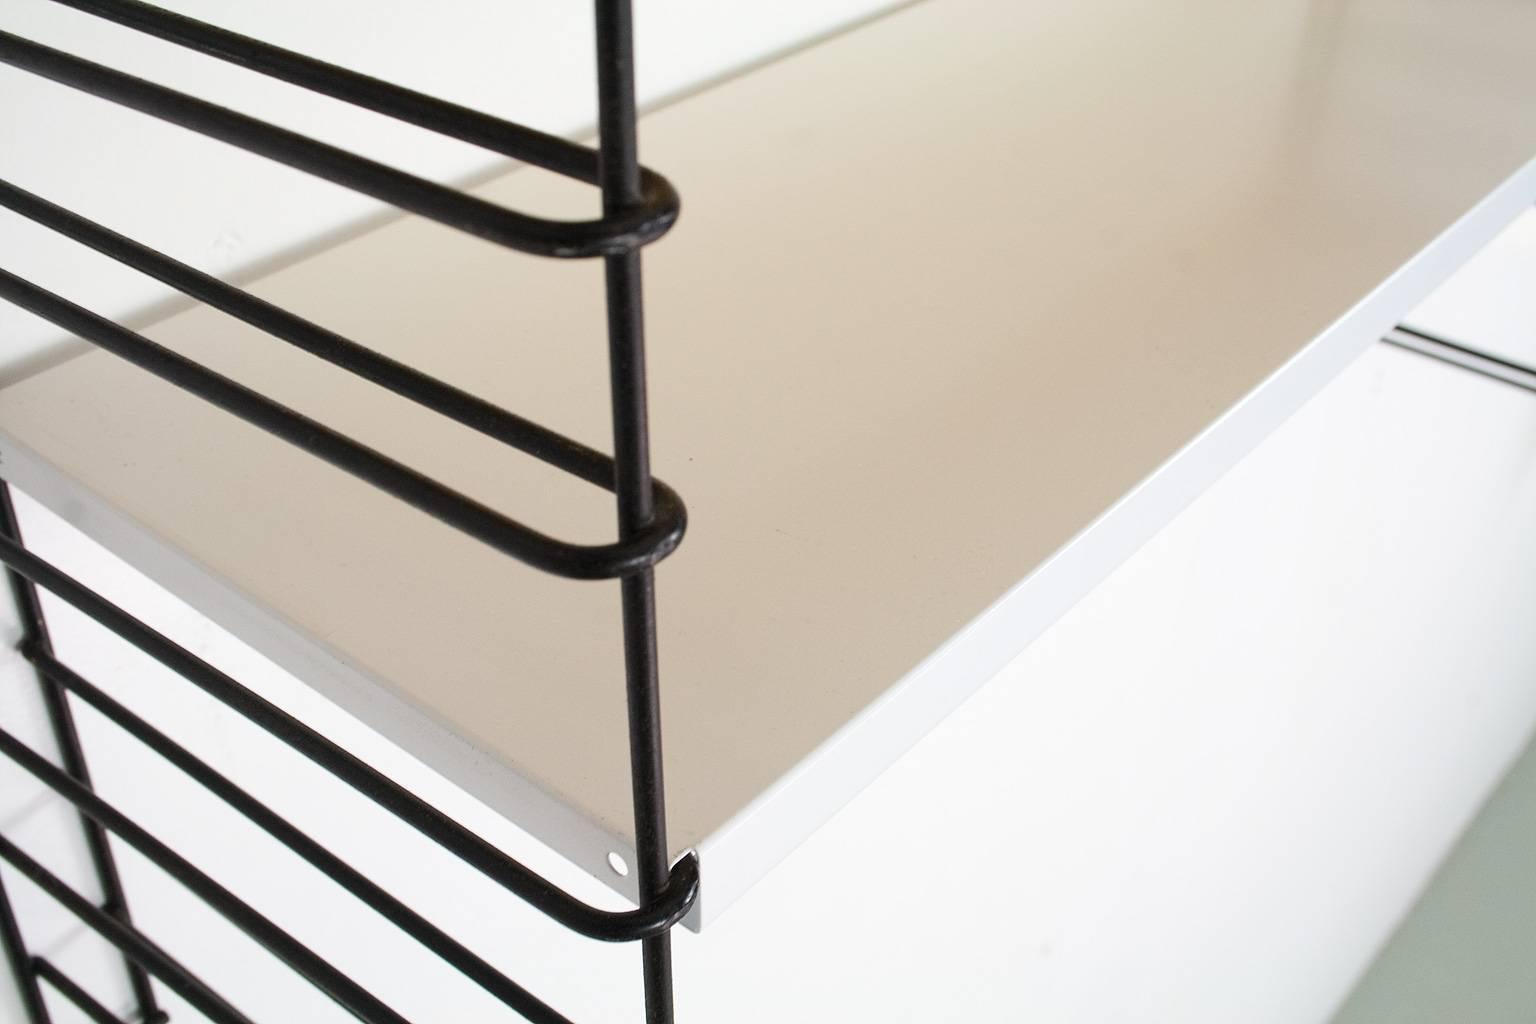 Mid-20th Century Multicolored Metal Wall Rack by Adrian Dekker for Tomado Holland, 1953